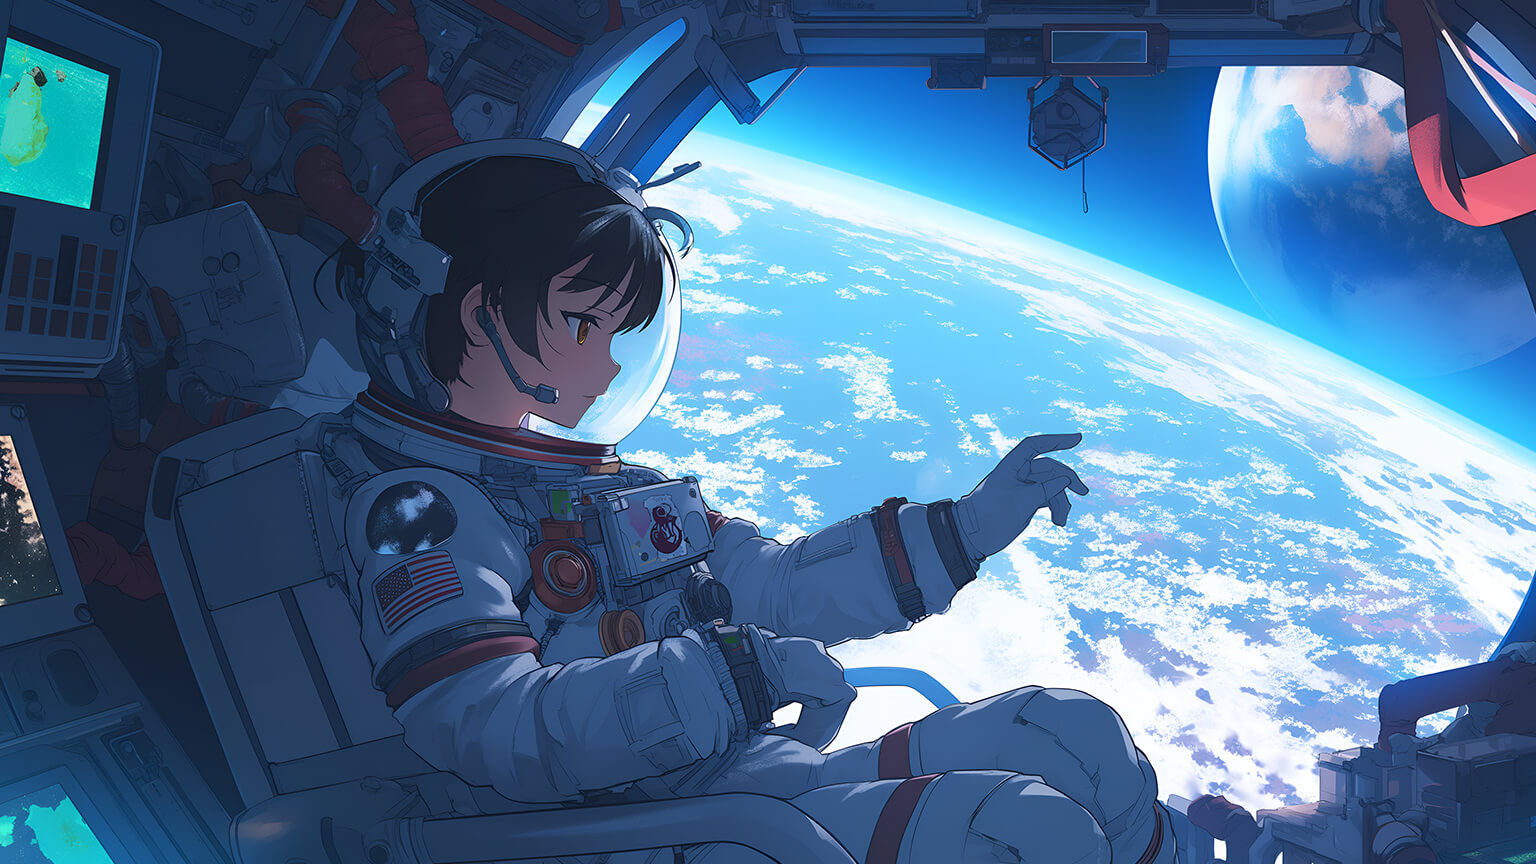 weak-caribou574: Create a young woman in anime style with astronaut clothes  looking at outer space.